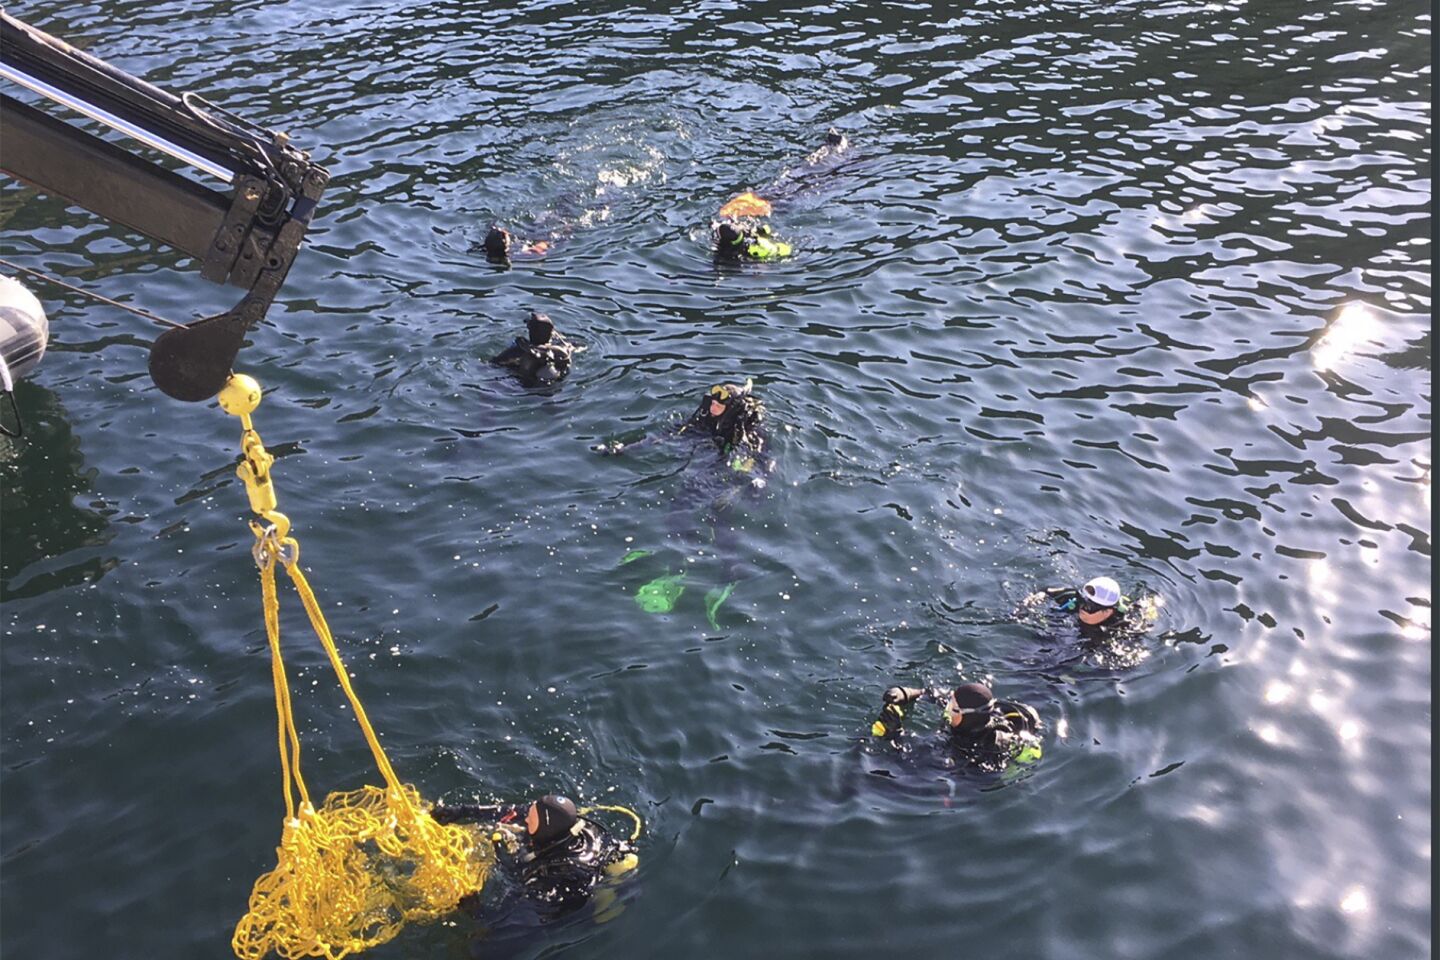 Divers and support crews from many agencies work the scene of the dive boat fire off Santa Cruz Island.